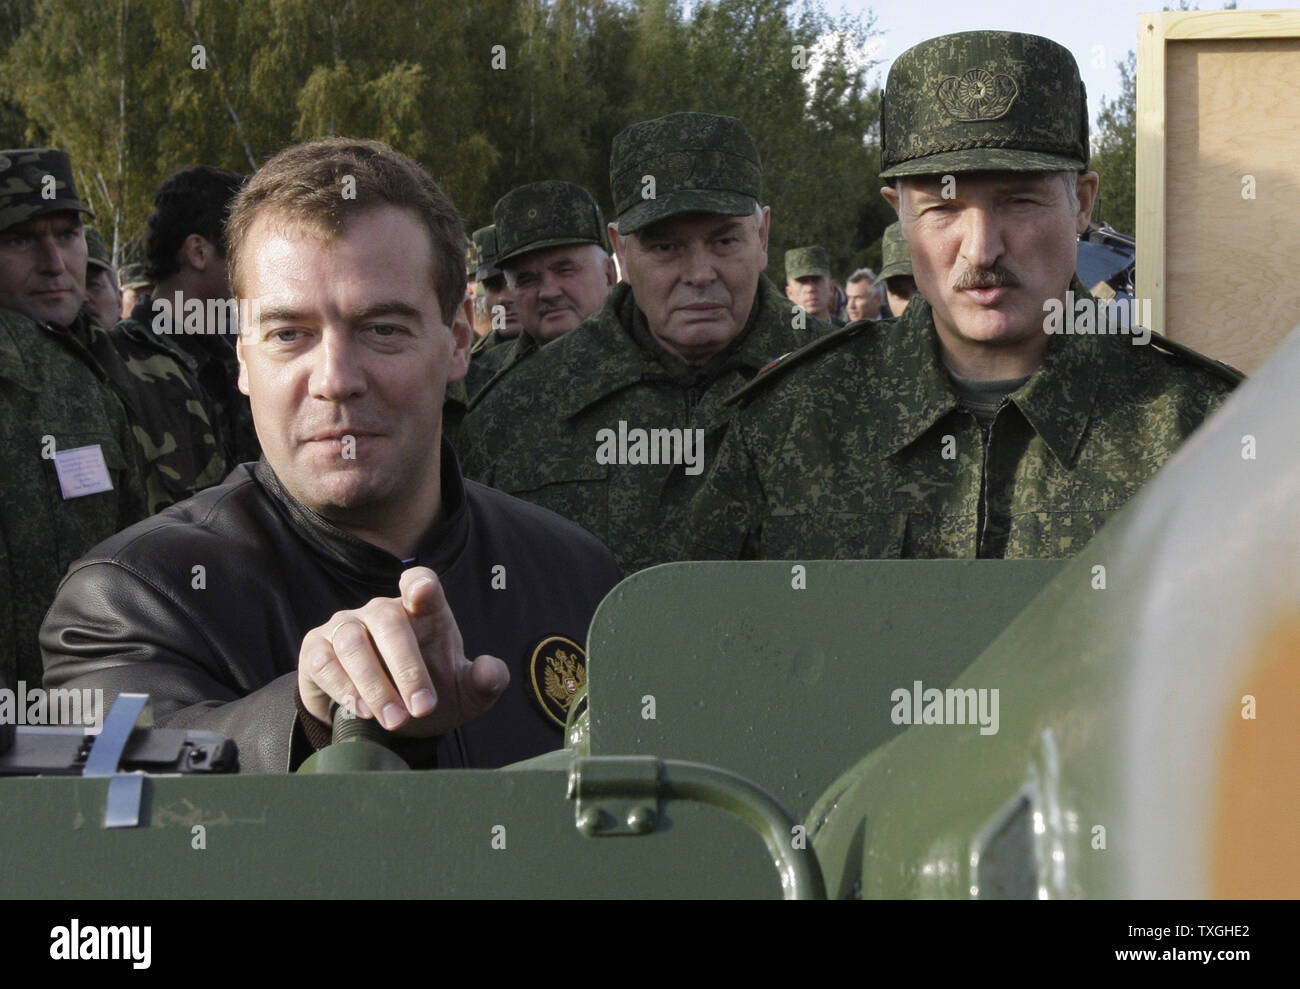 Russian President Dmitry Medvedev (L) and Belorussian President Alexander Lukashenko inspect prototype military equipment at Belarusian 61th Air Base during the final stage of Zapad-2009 (West 2009) Russian-Belarus joint military exercises near Brest in western Belarus on September 29, 2009. UPI/Anatoli Zhdanov Stock Photo